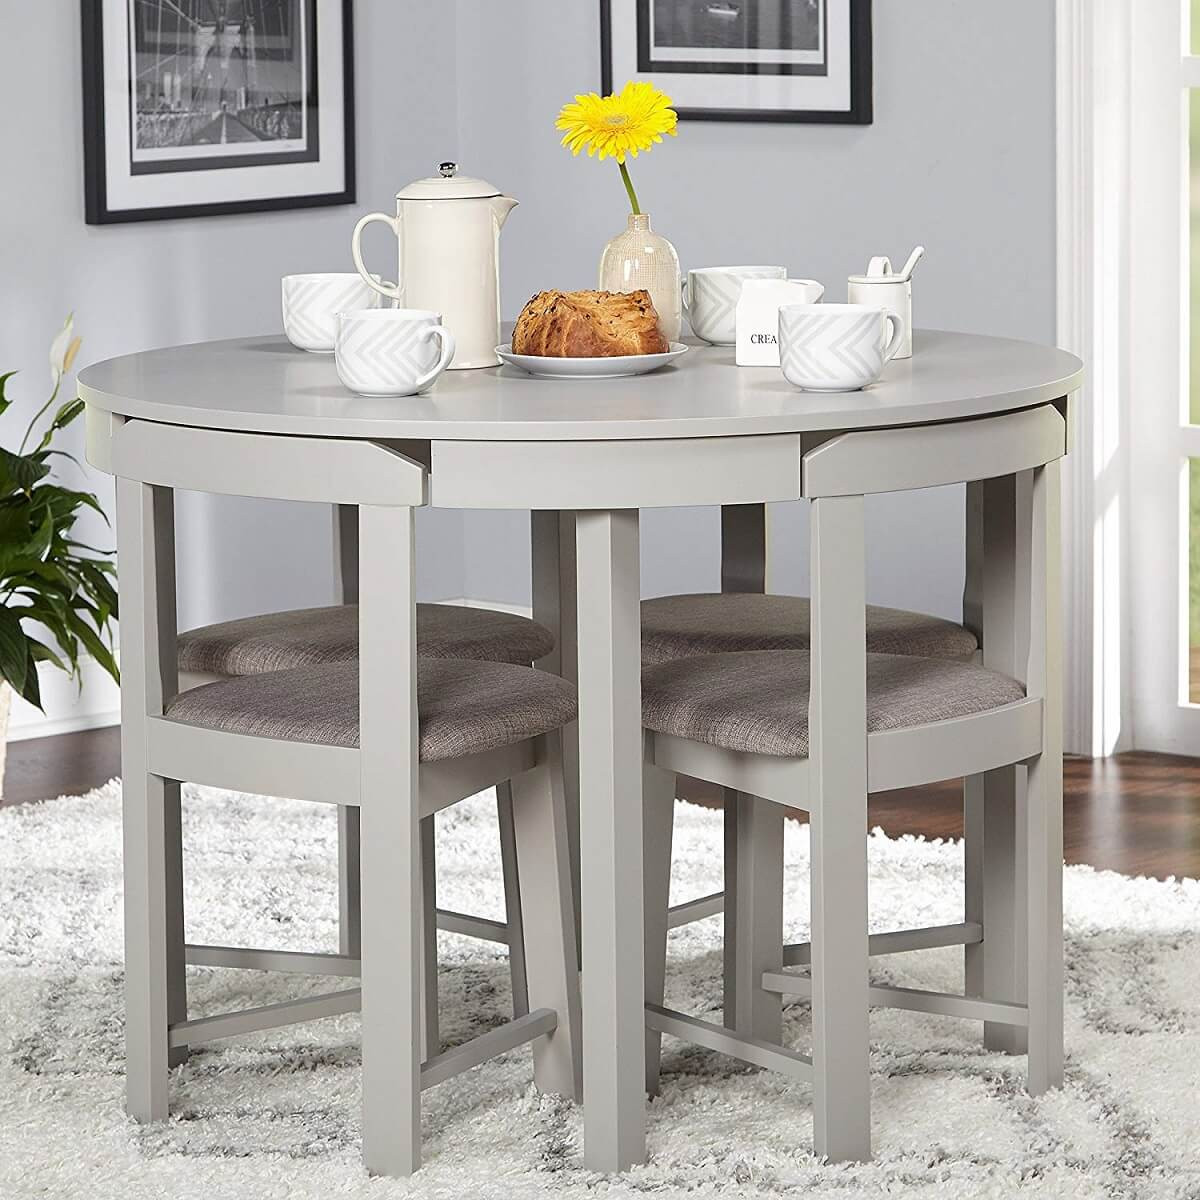 Small Round Kitchen Tables
 19 Small Kitchen Tables For Conserving Space • Insteading